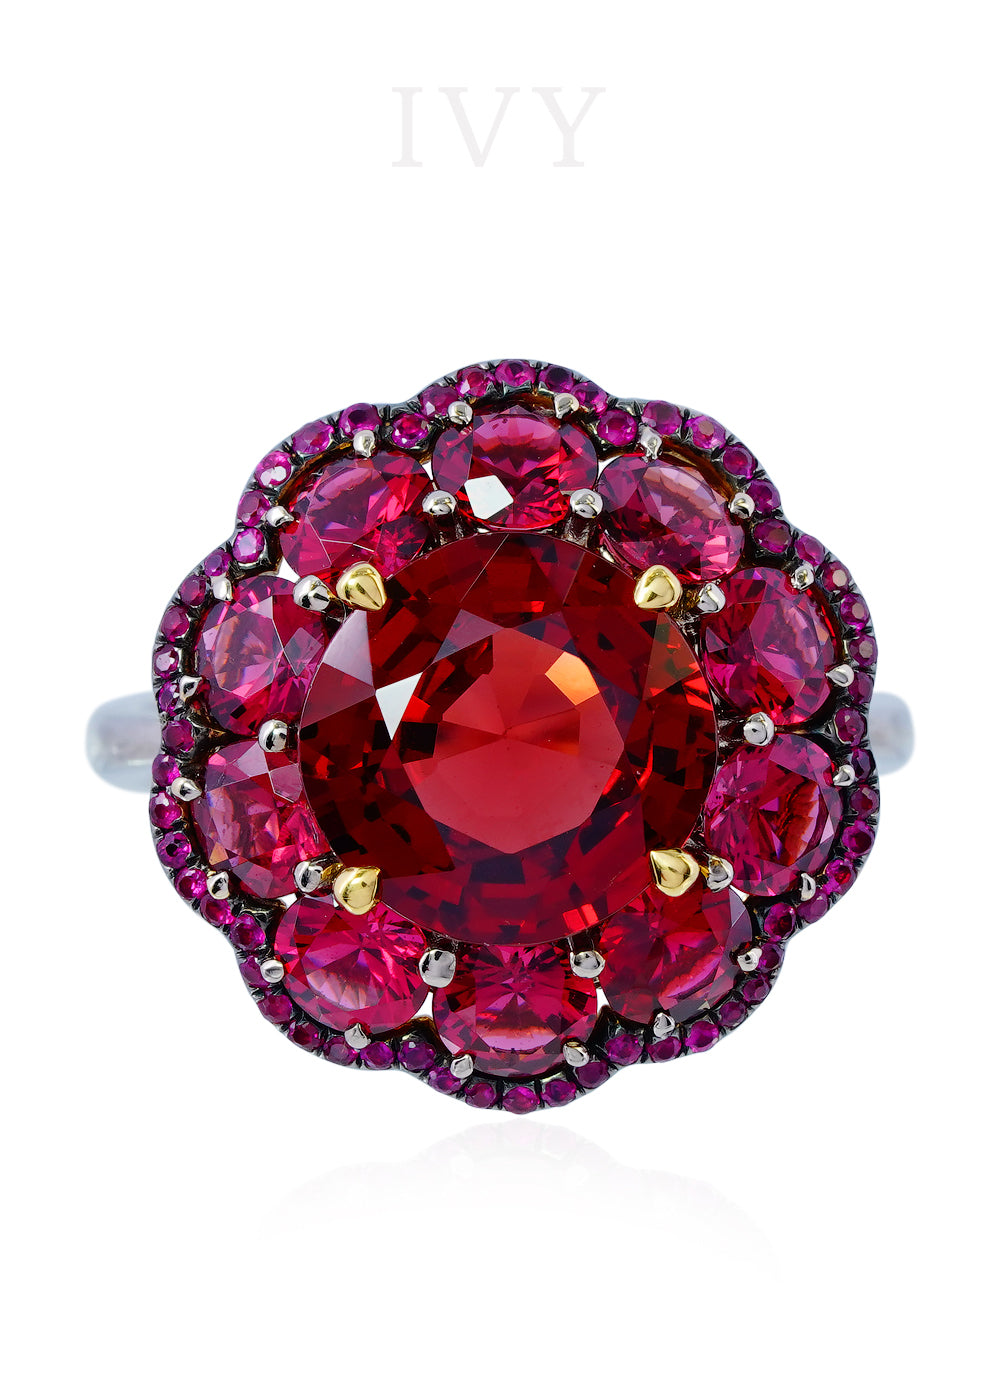 Burma Red Spinel and Diamond Ring